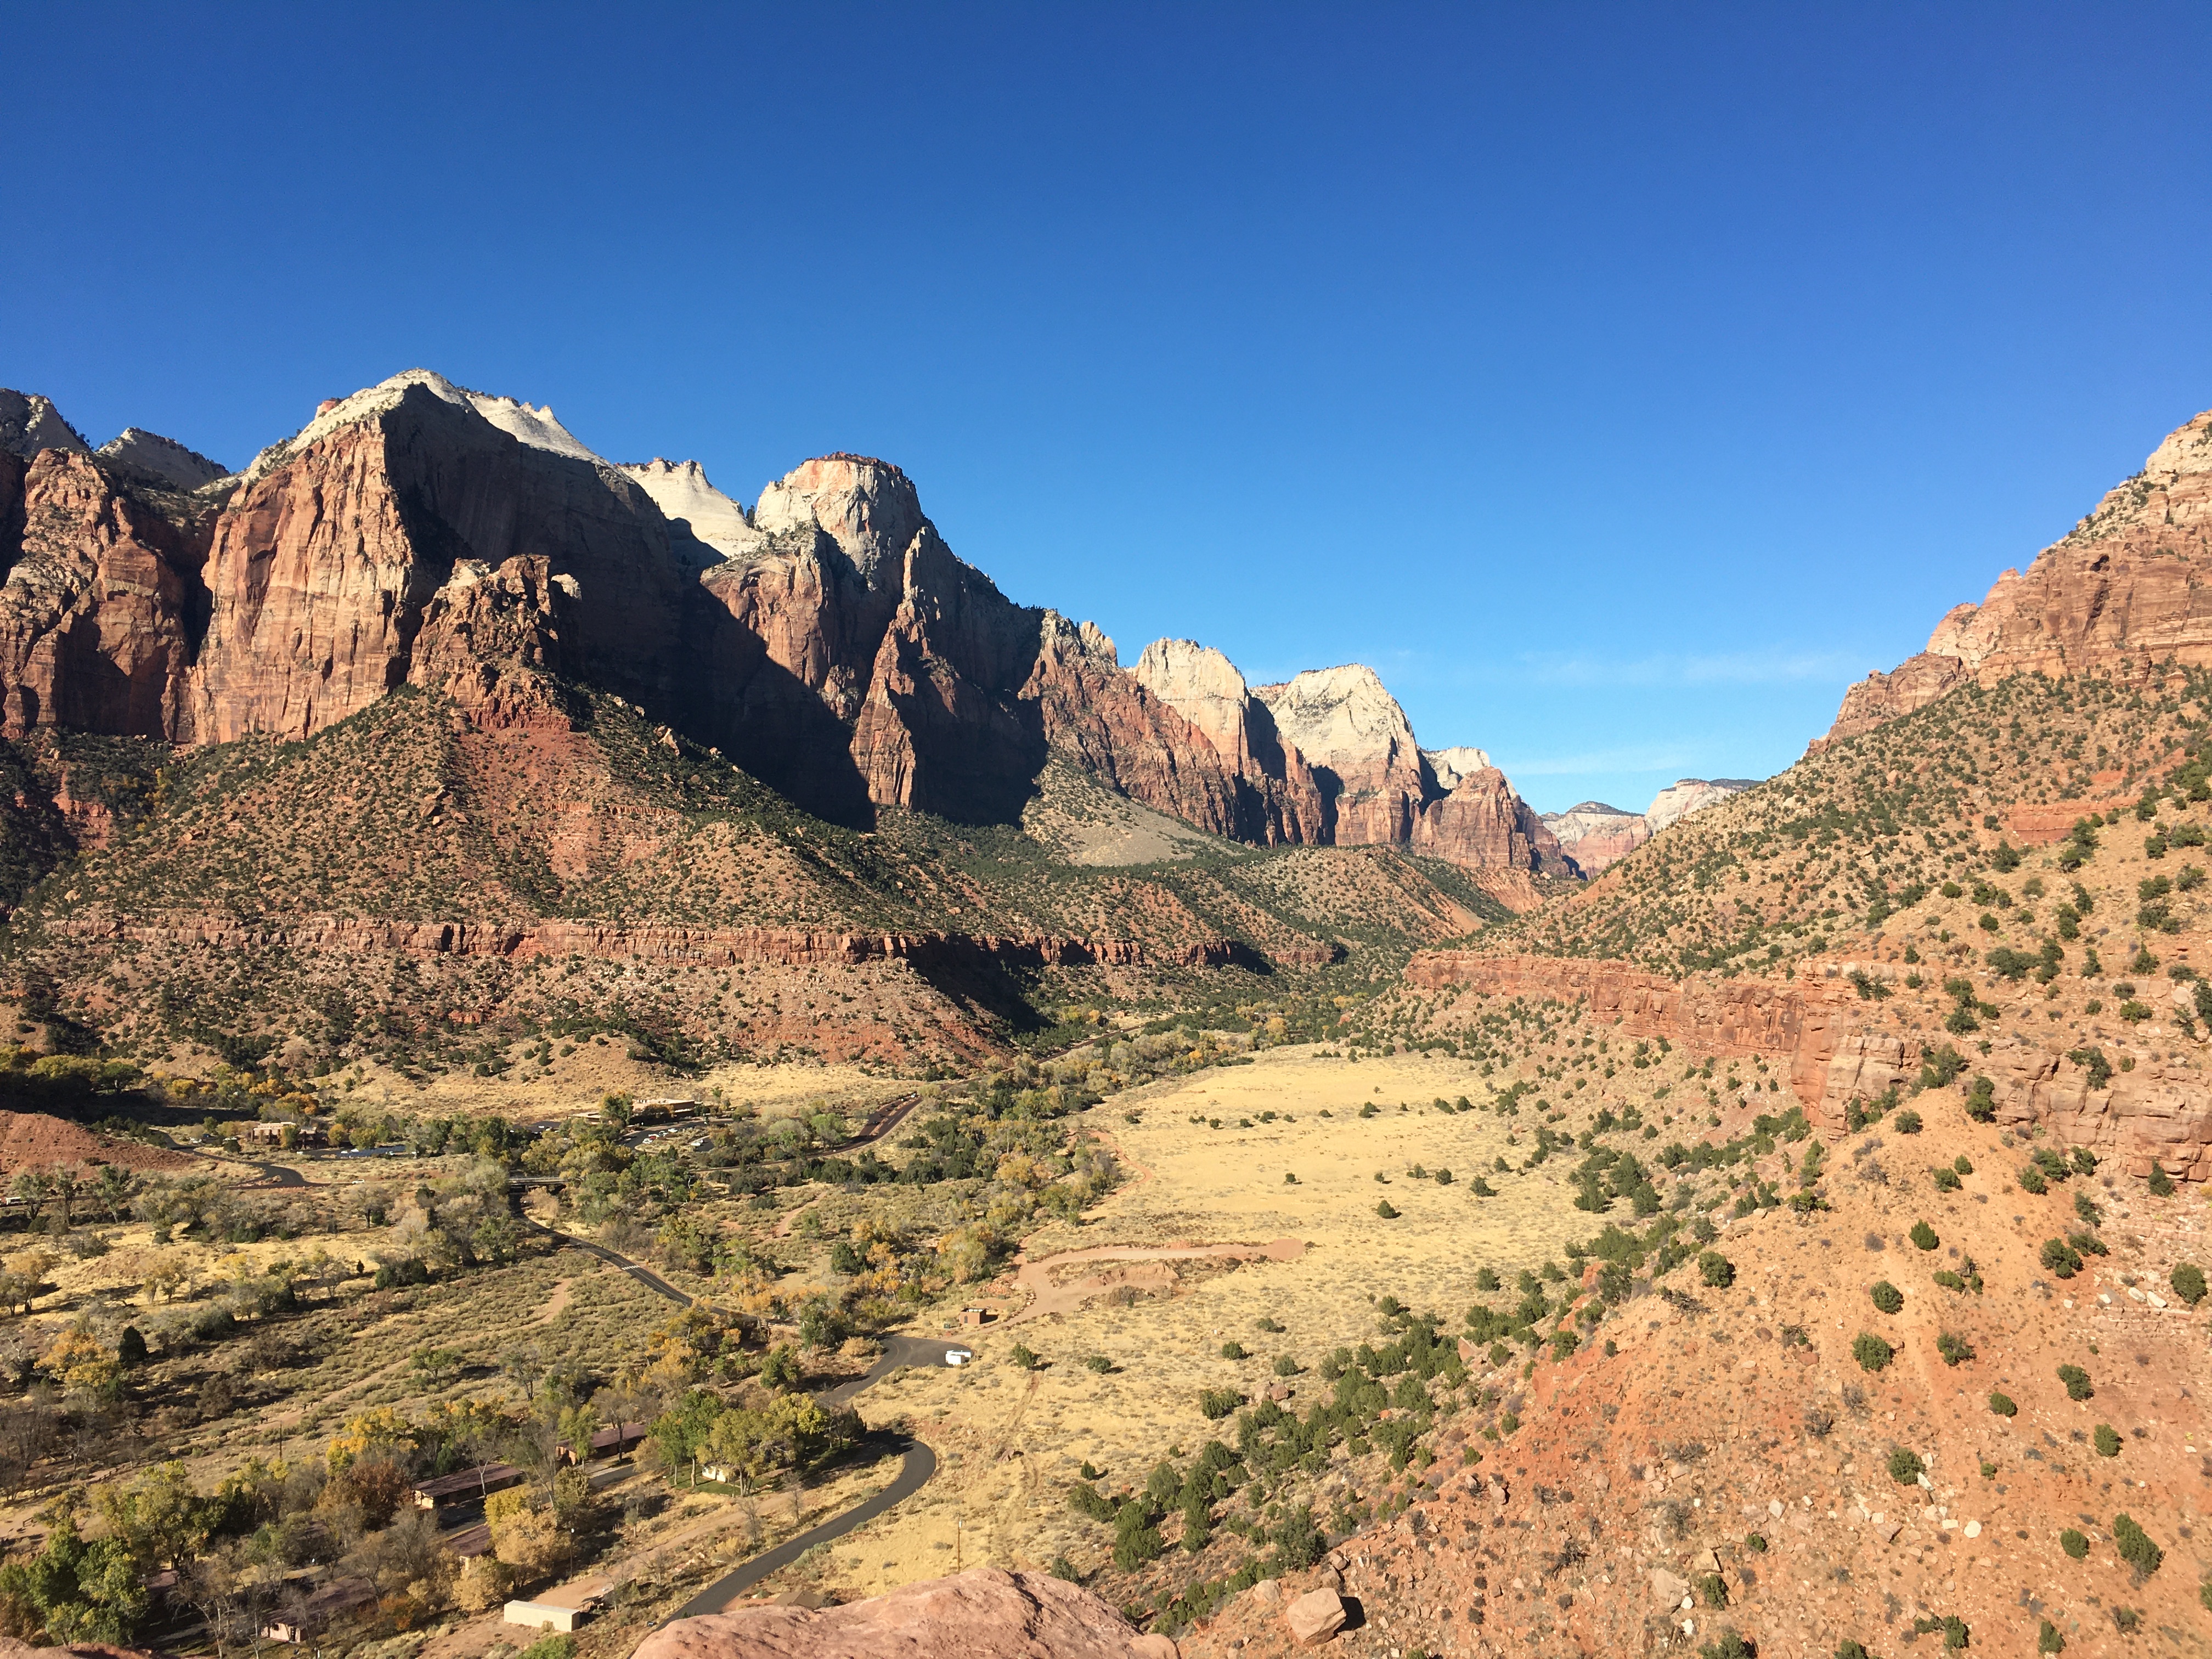 View from Watchman Trail